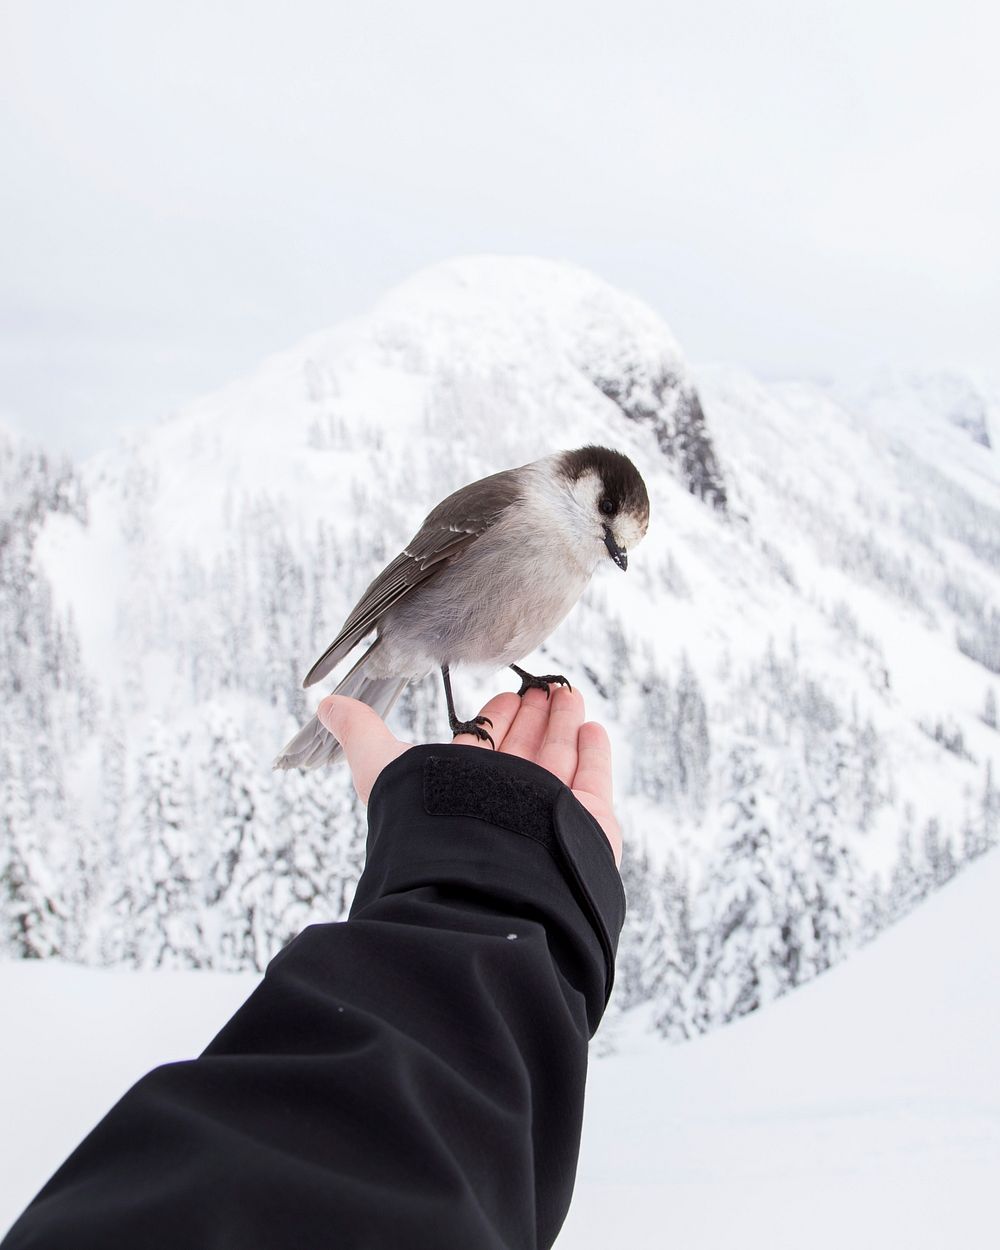 Bird on hand in snow. Original public domain image from Wikimedia Commons